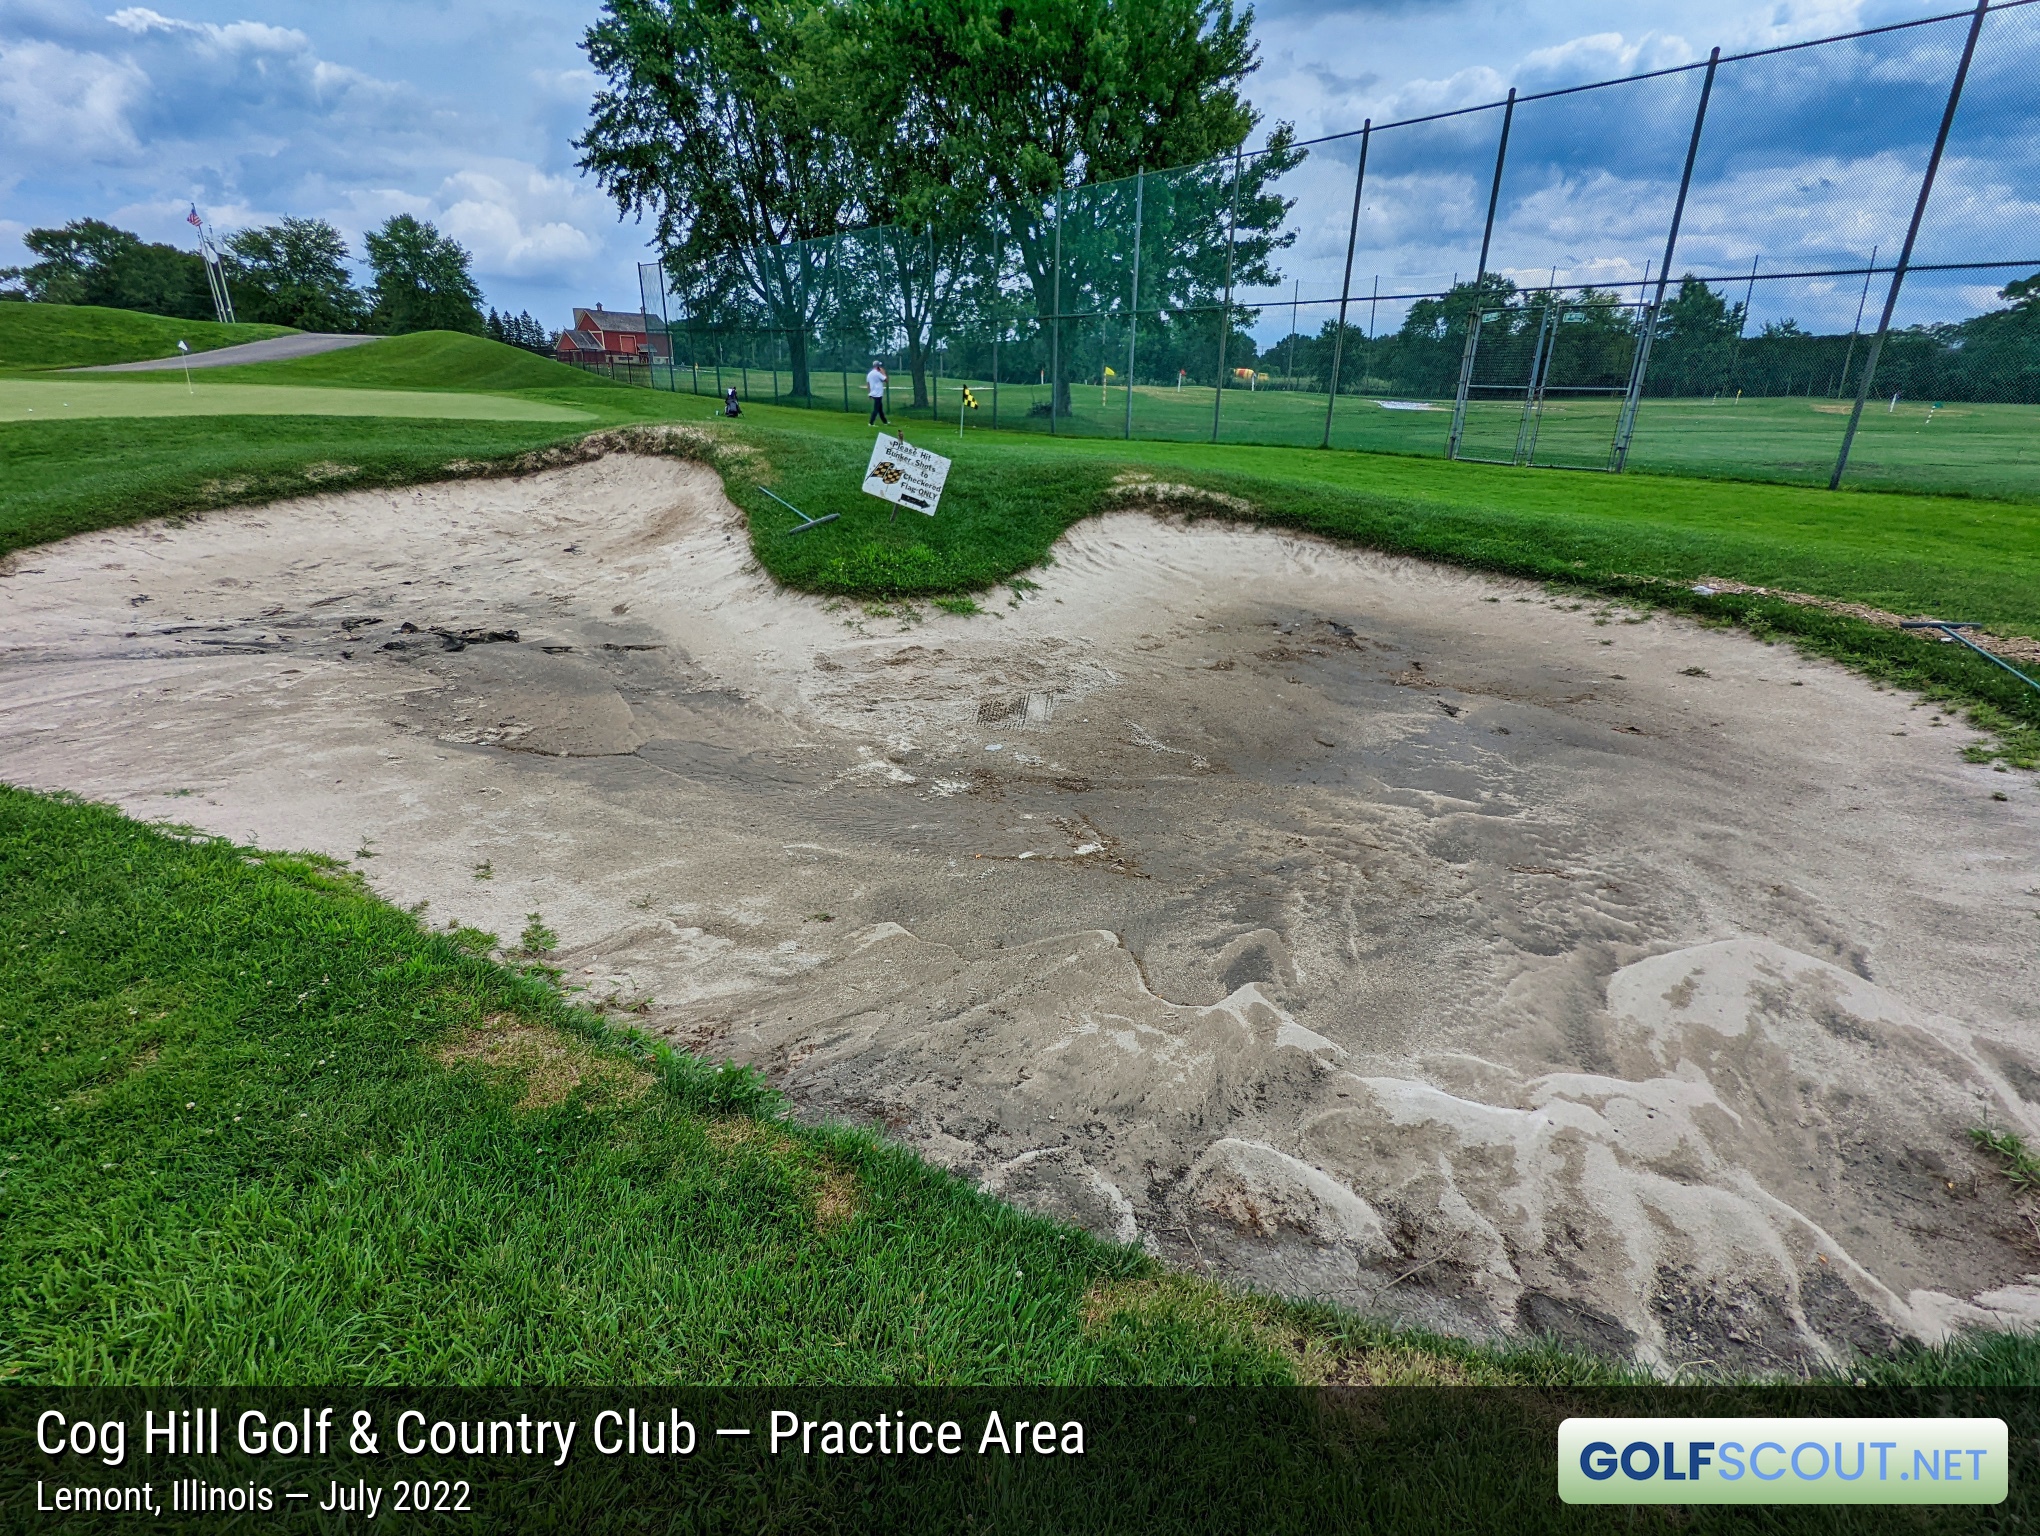 Photo of the practice area at Cog Hill Course #4 - Dubsdread in Lemont, Illinois. A practice bunker. It rained heavily the day before I visited Cog, so it's not in good shape in the photo. I've practiced here plenty before, it doesn't look like this generally.